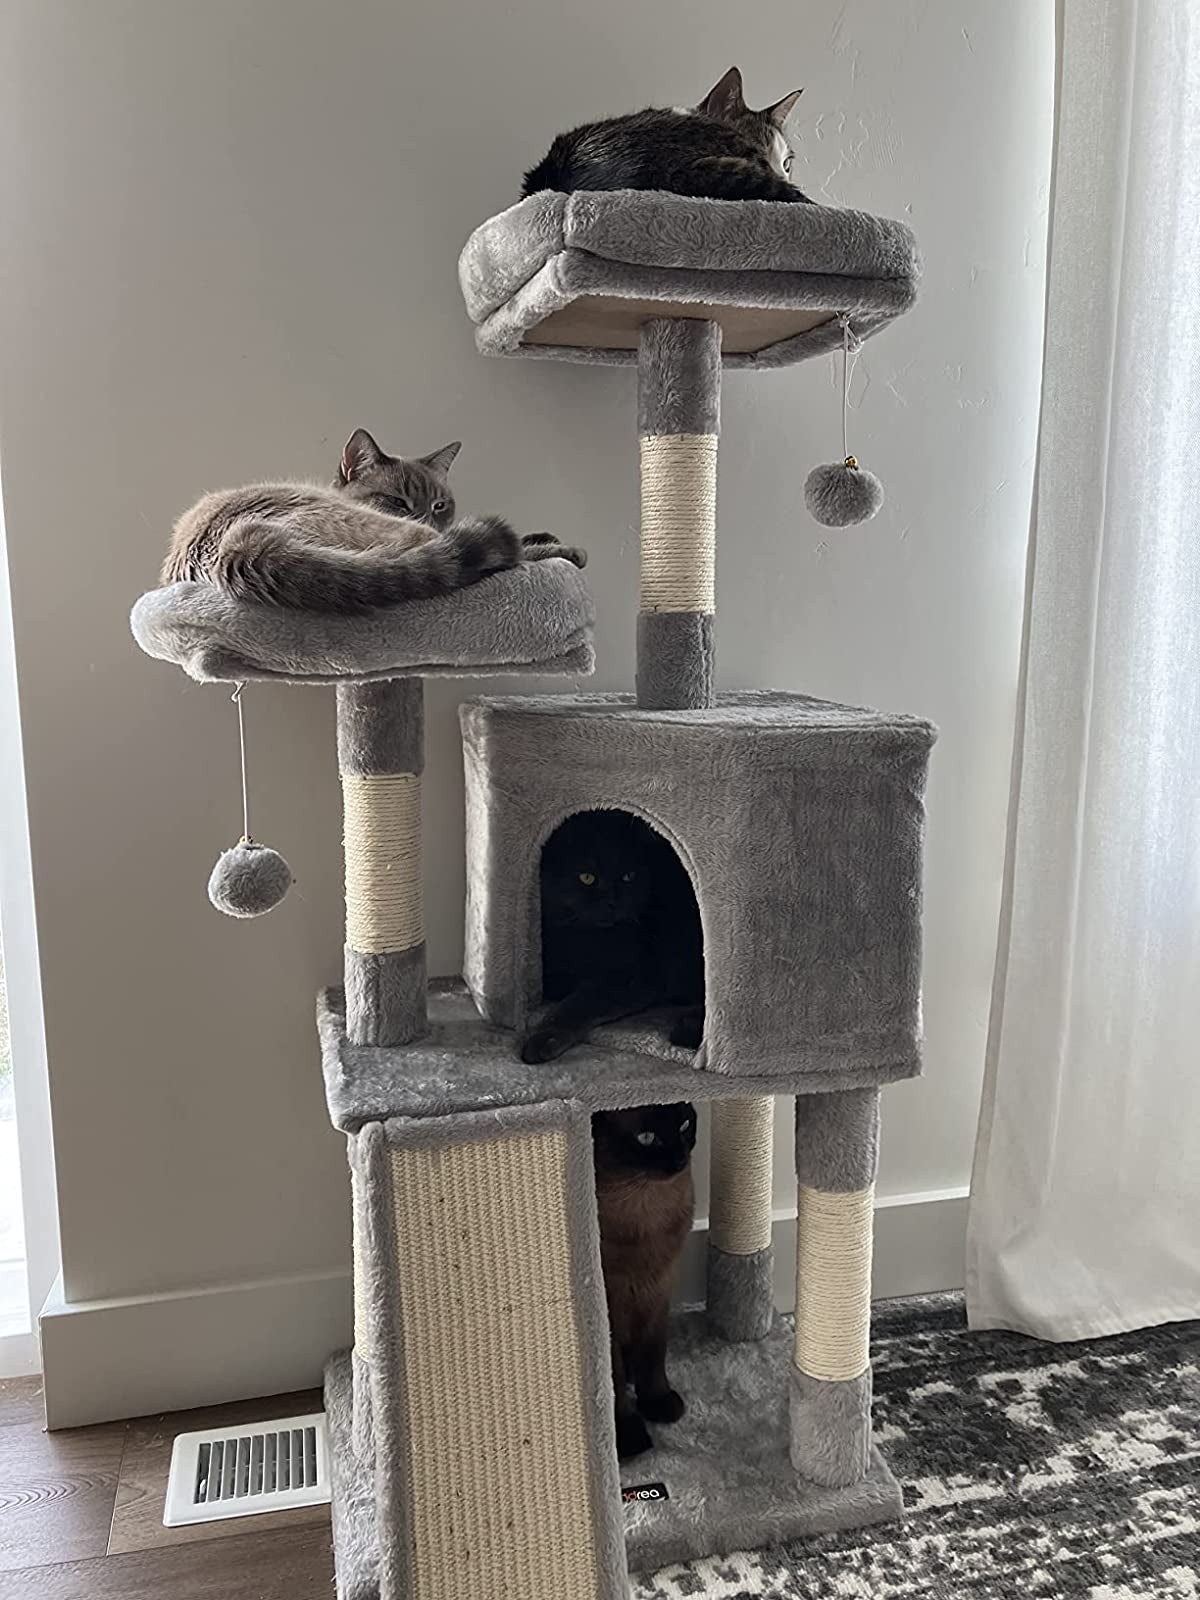 A reviewer's four cats on the tower - two in the perches, one in the little house, and one on the base level